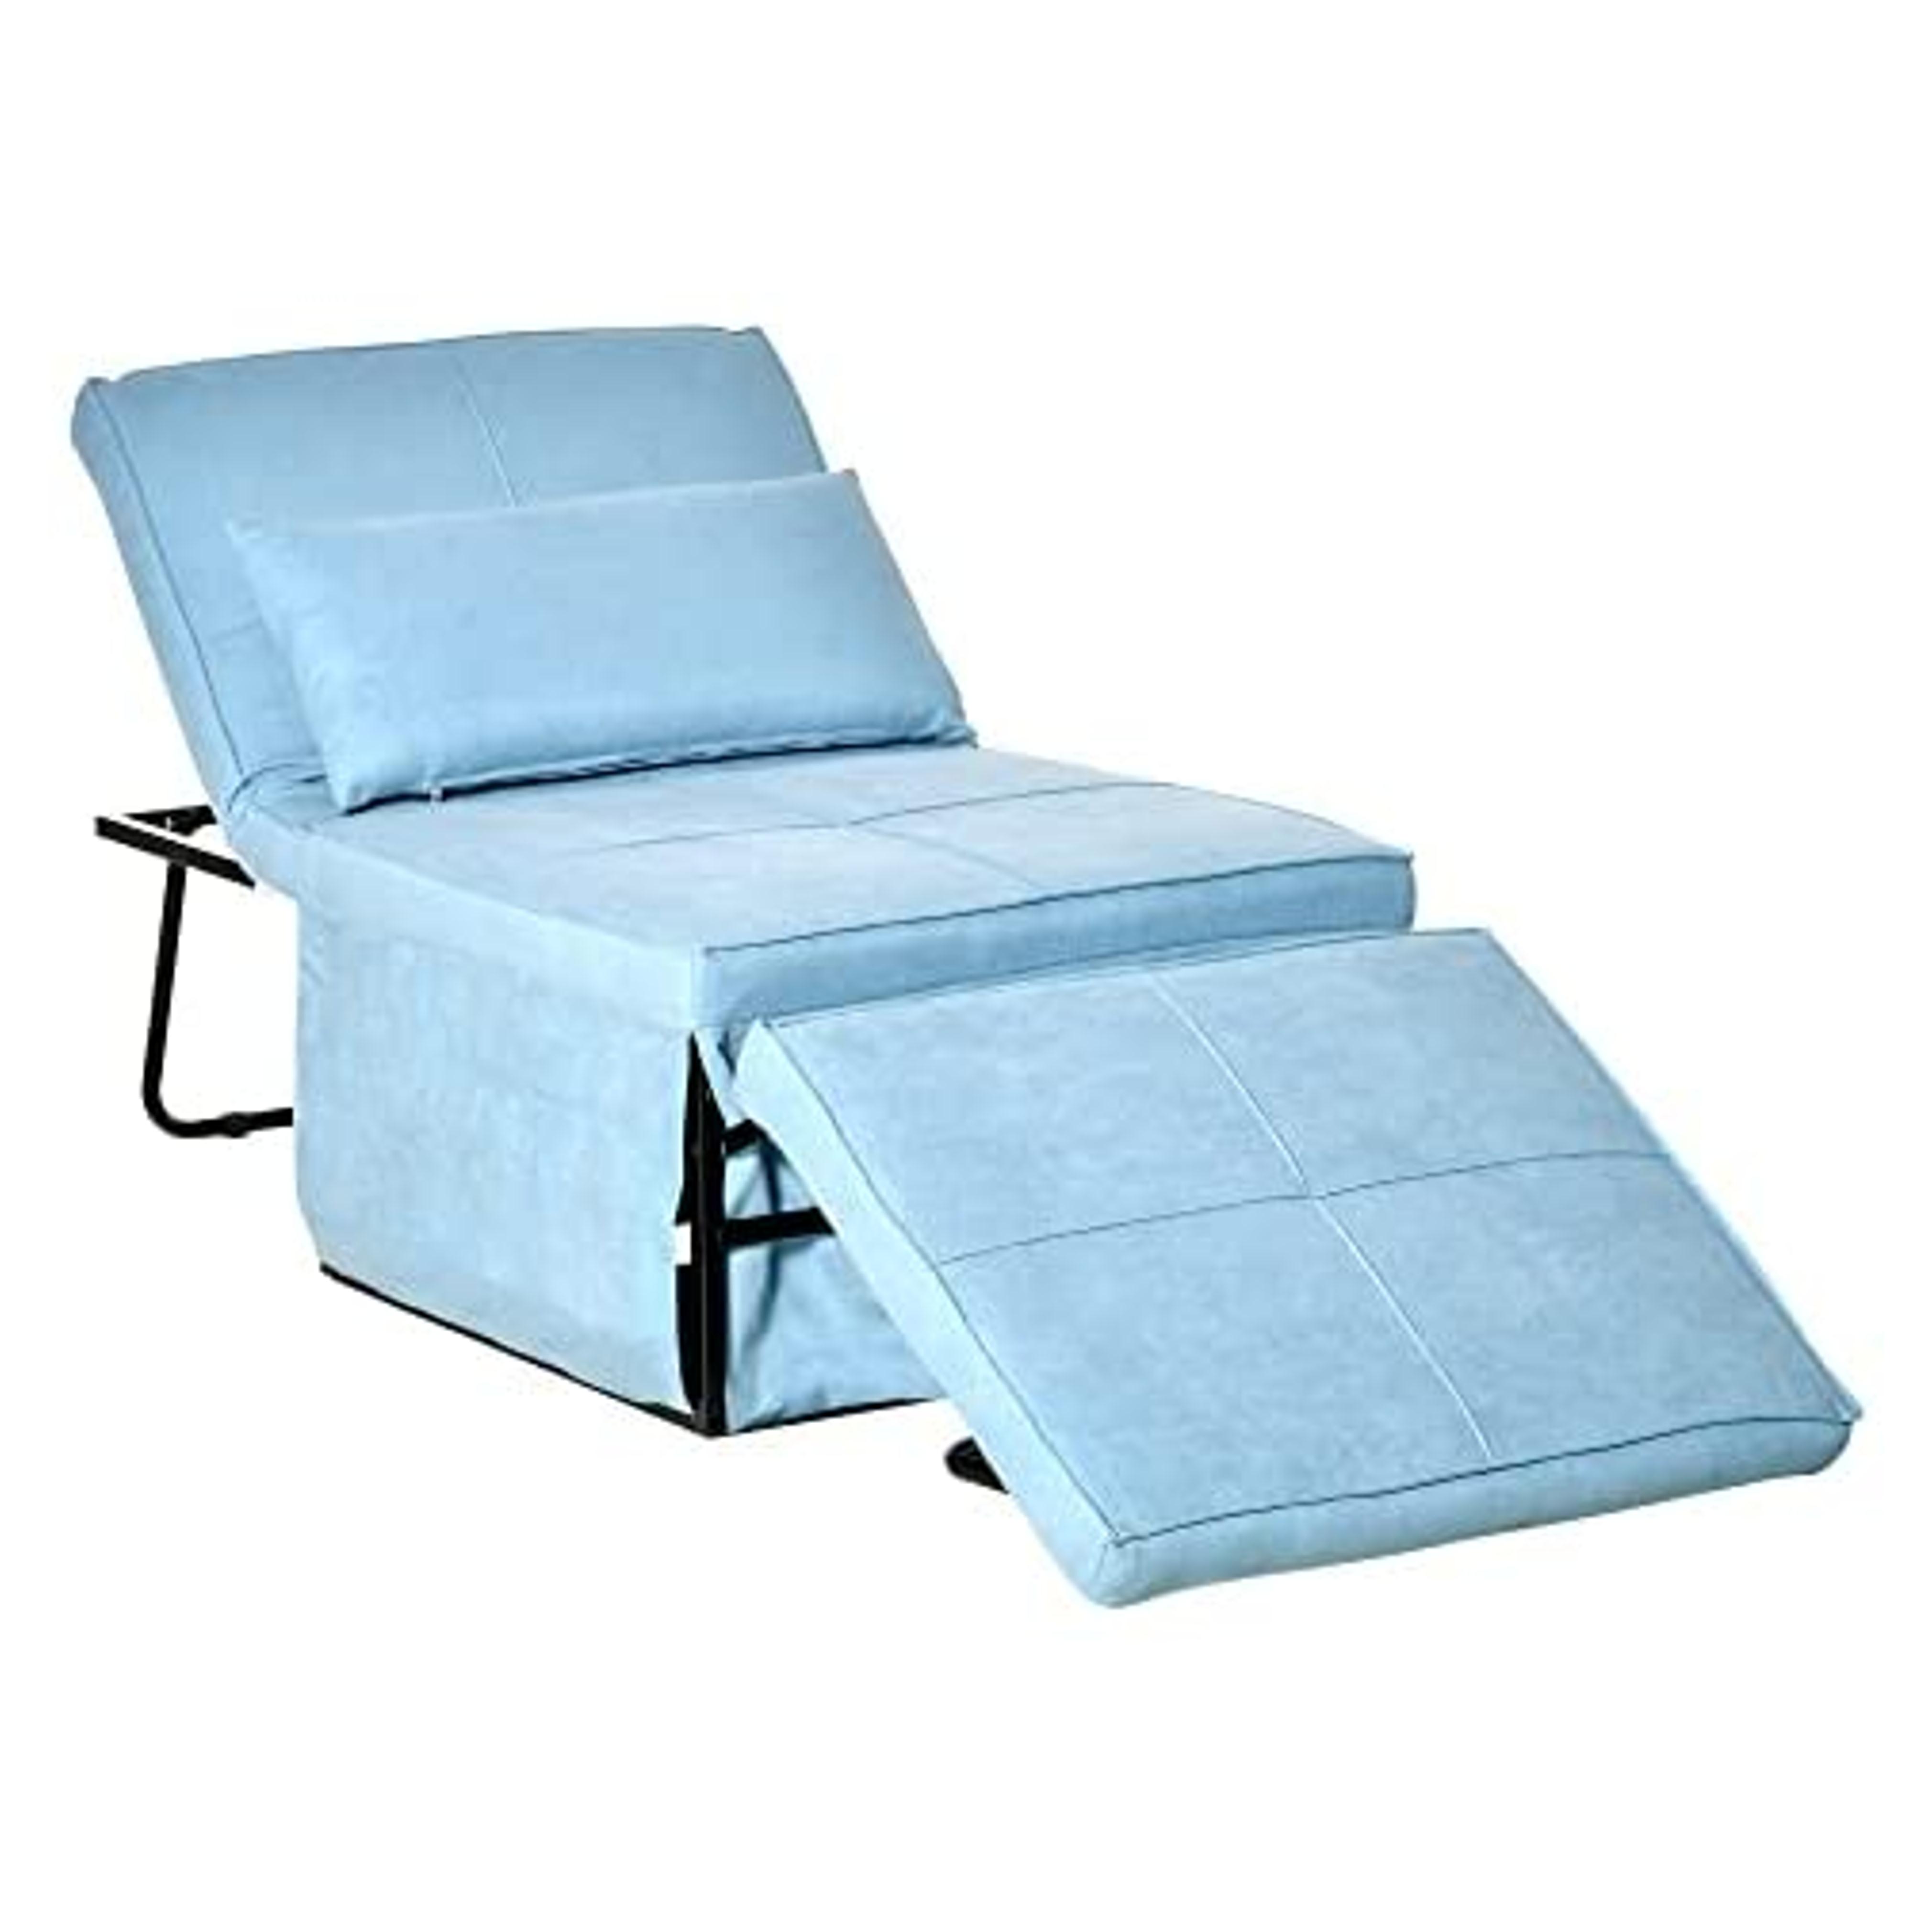 Amazon.com: HOMCOM 4-in-1 Multi Function Folding Single Sofa Bed with Retractable Footrest, Convertible Sleeper with Adjustable Backrest for Living Room and Small Spaces, Light Blue : Home & Kitchen